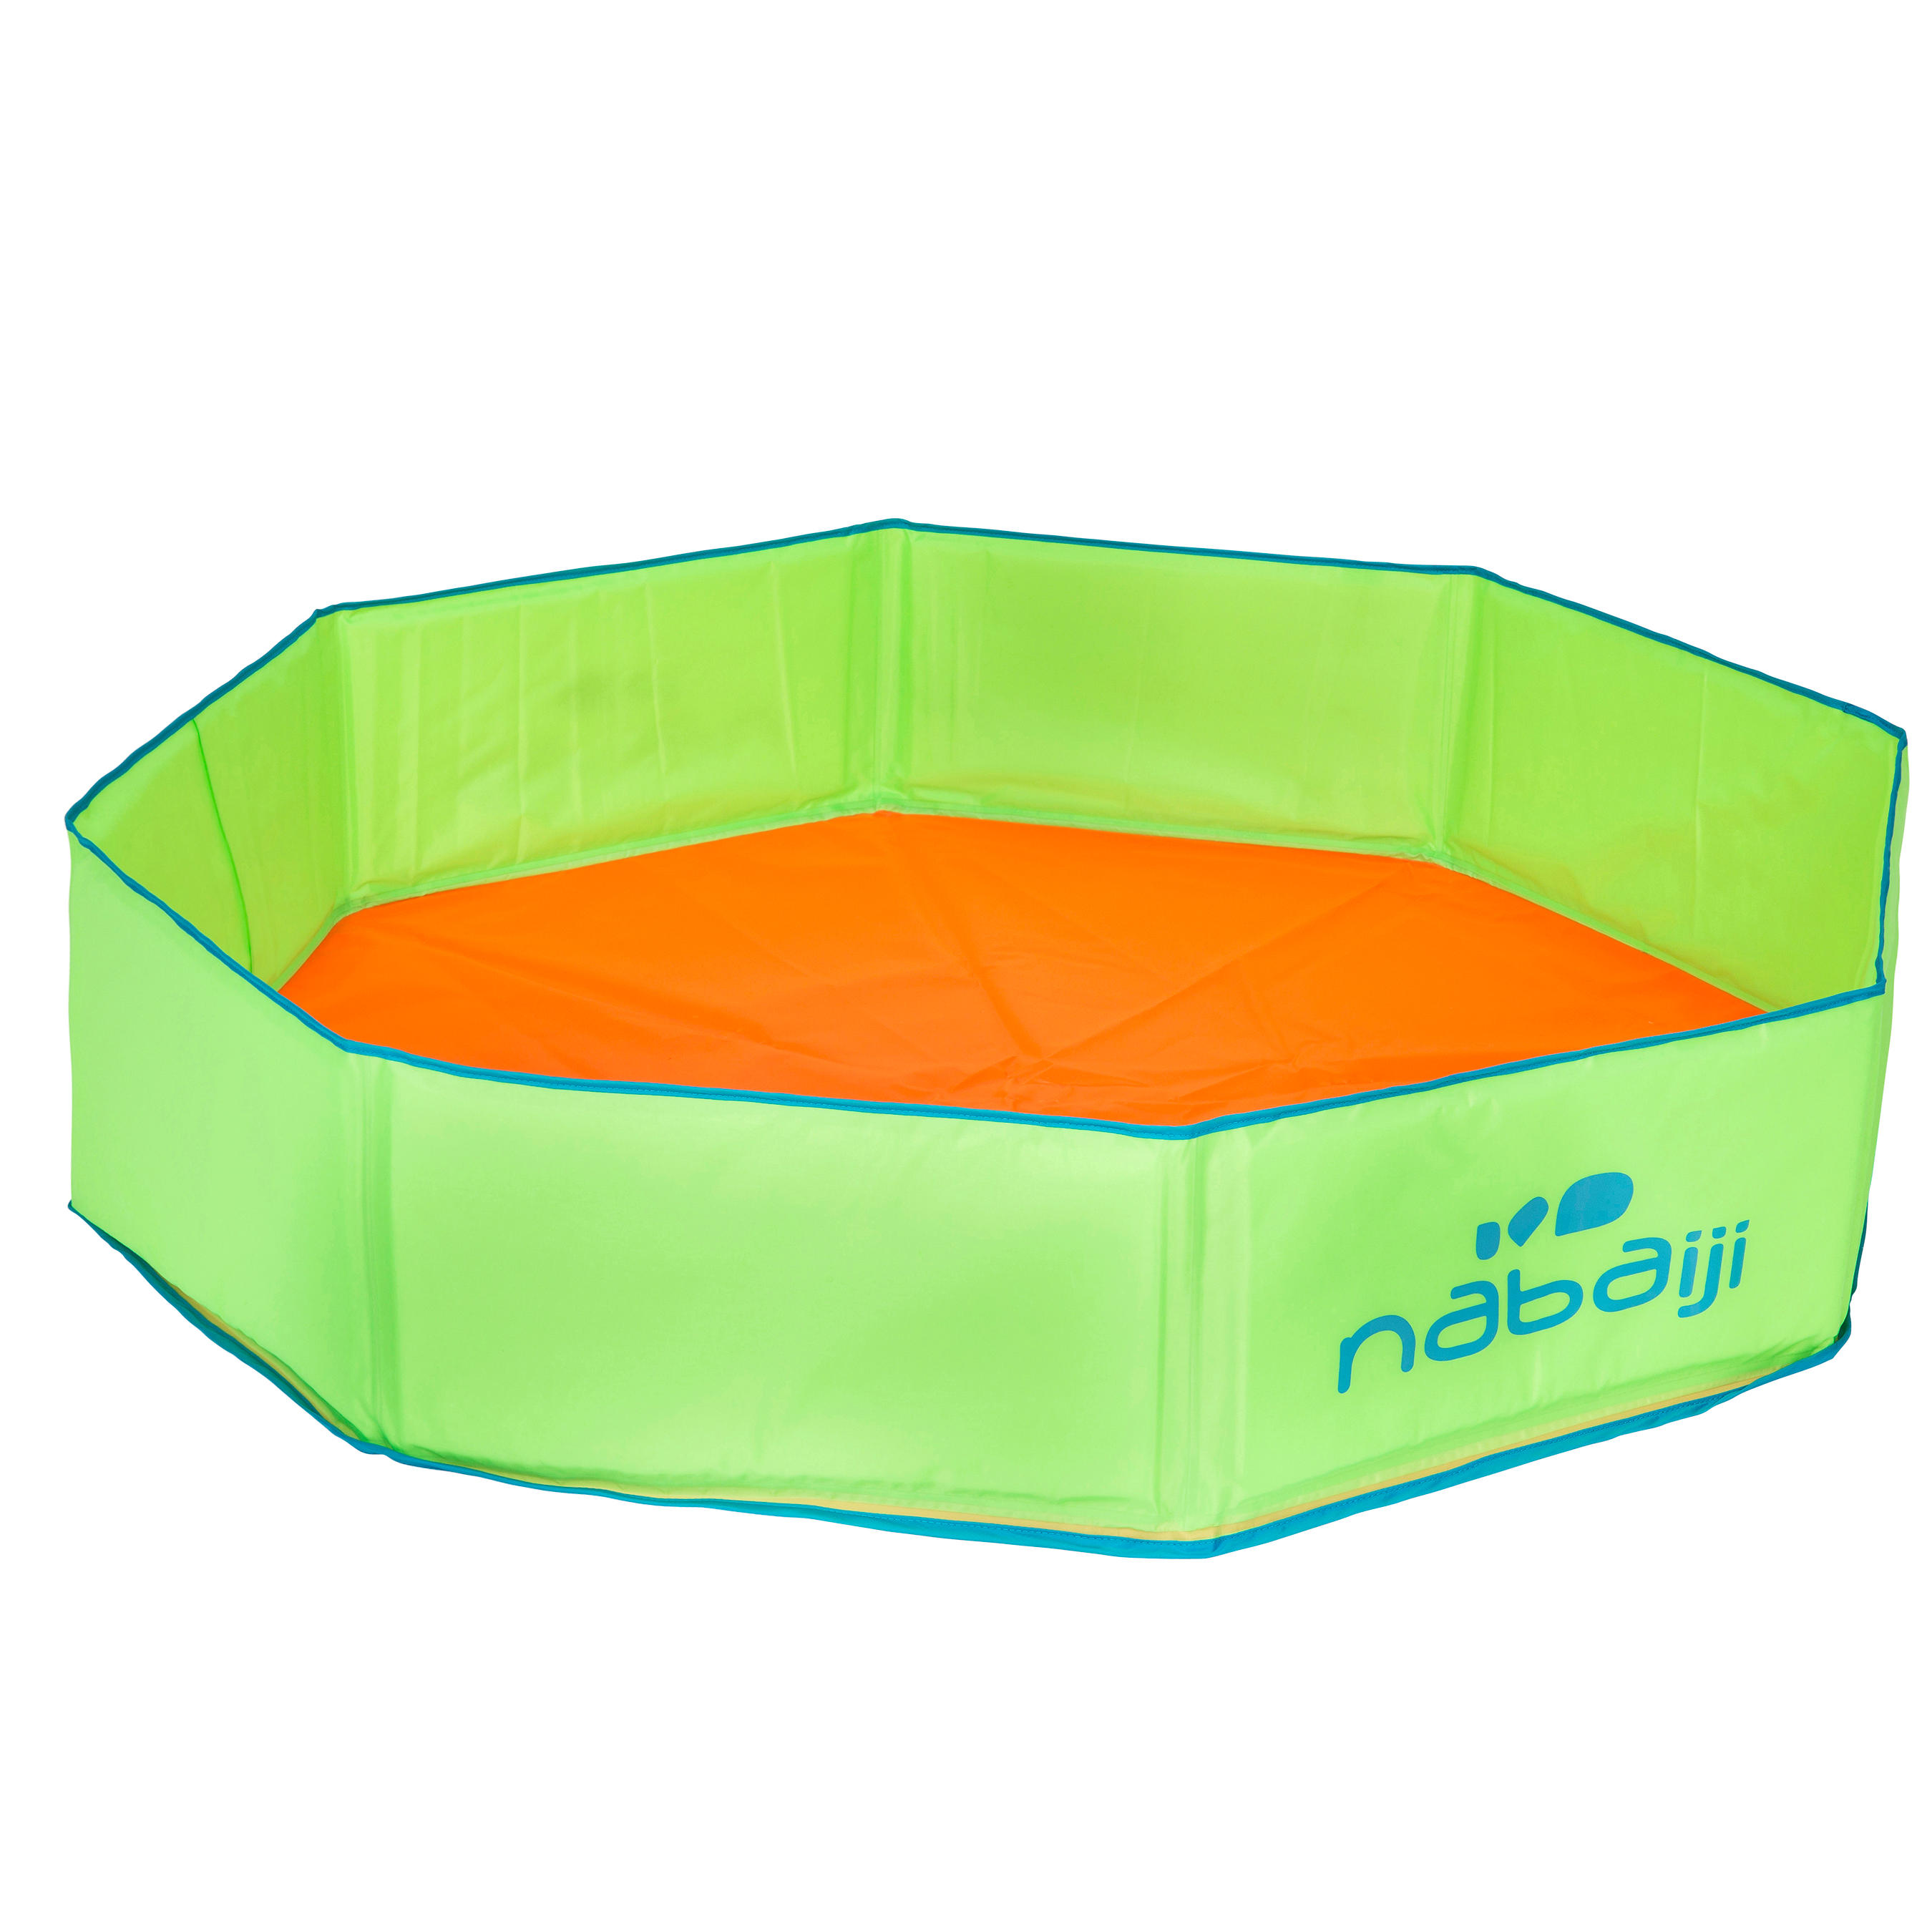 NABAIJI TIDIPOOL + small children’s paddling pool with carry bag - green and orange